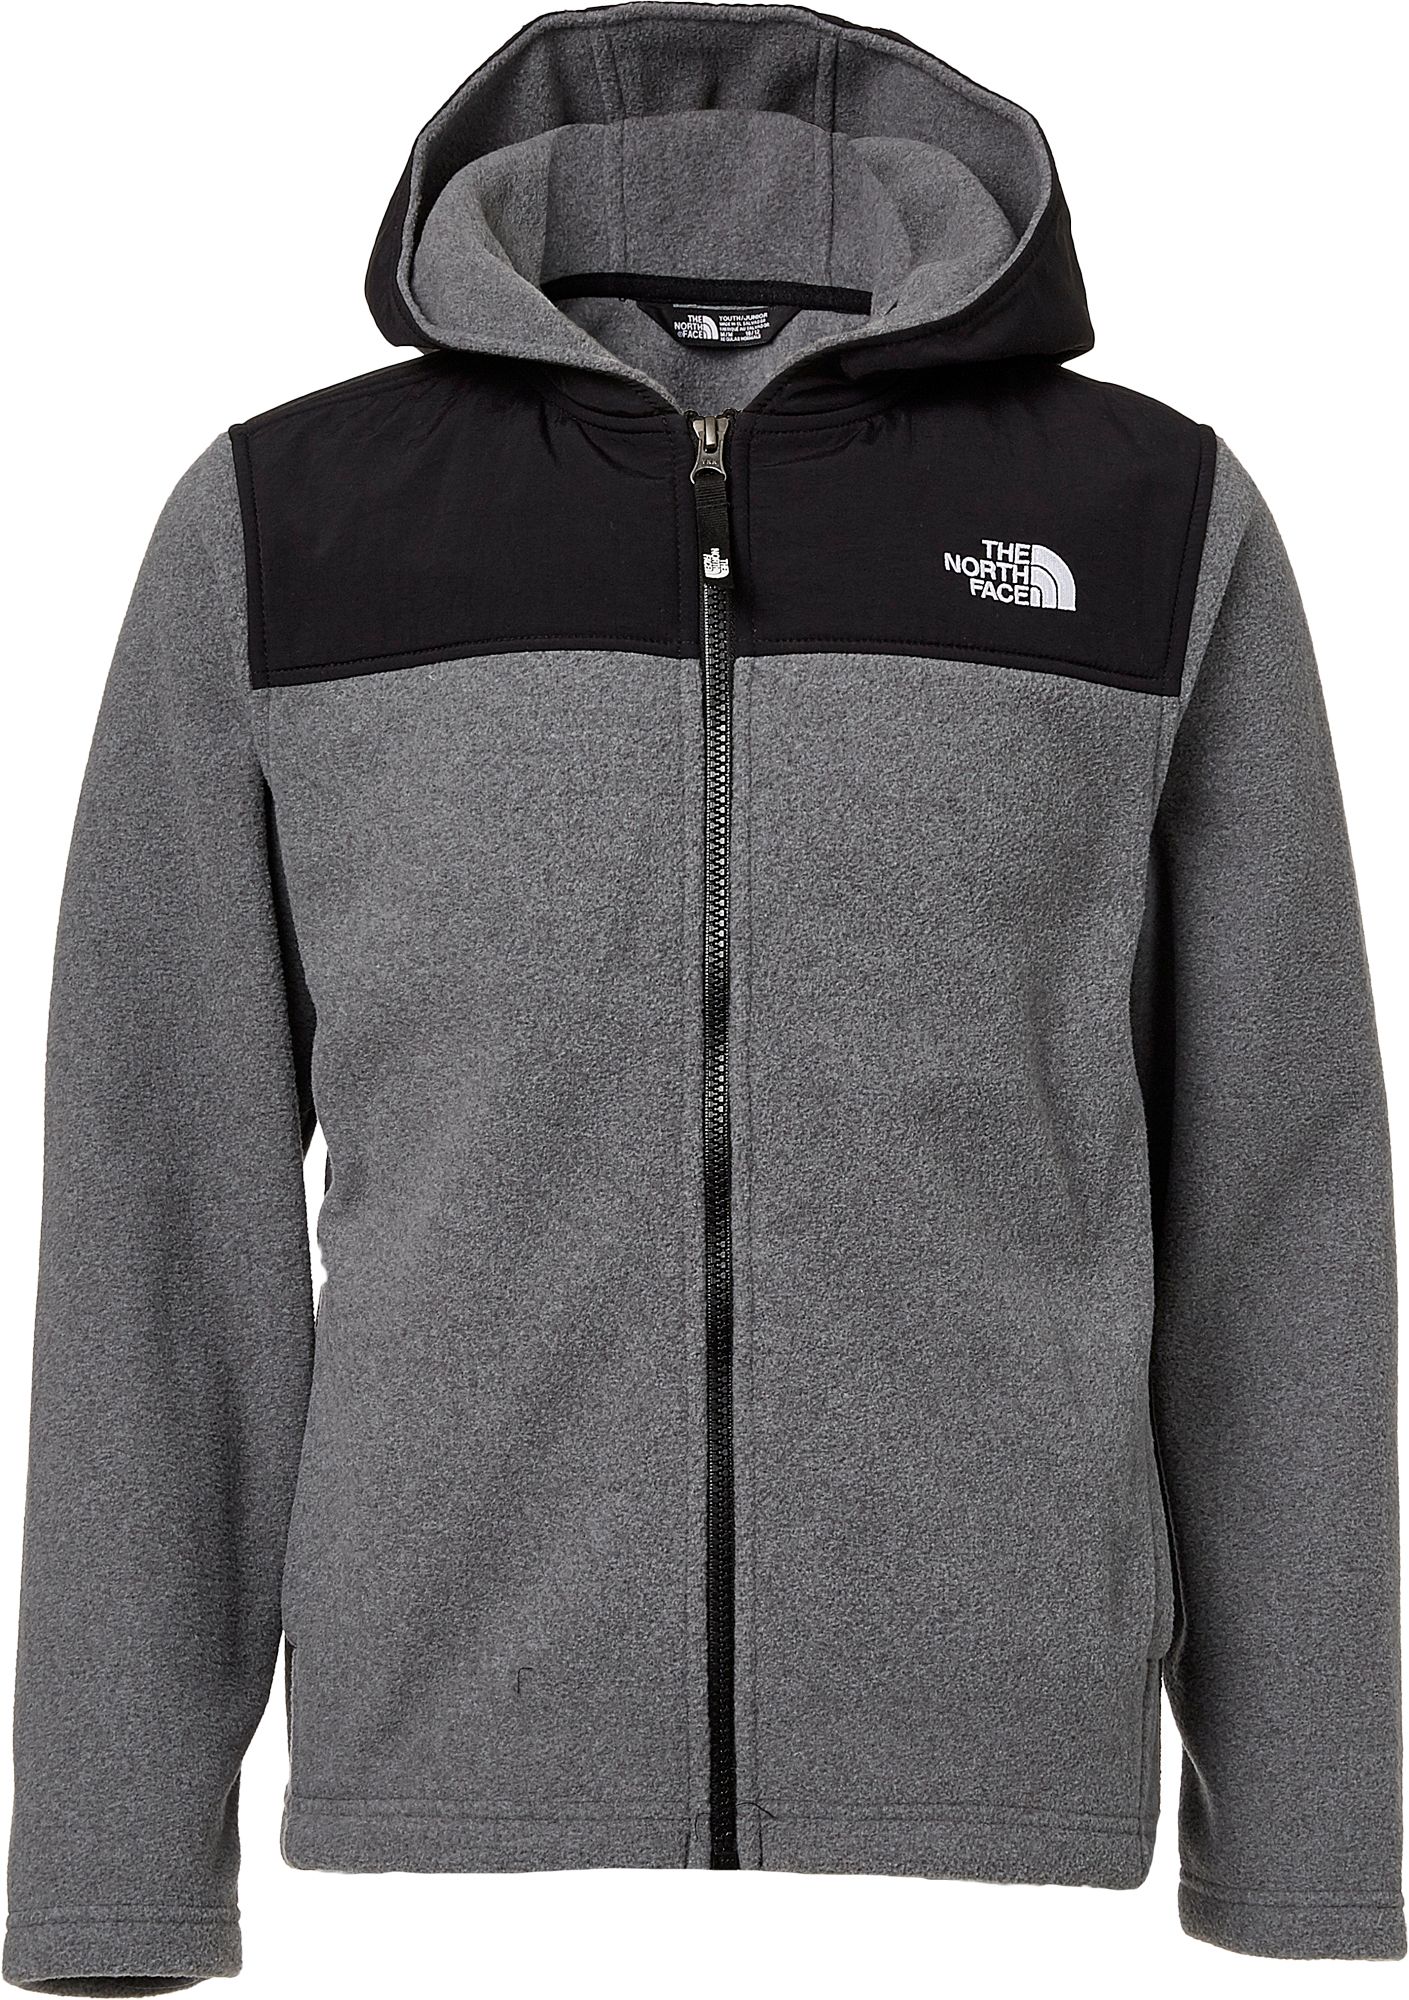 North Face Toddler All Around Hoodie 